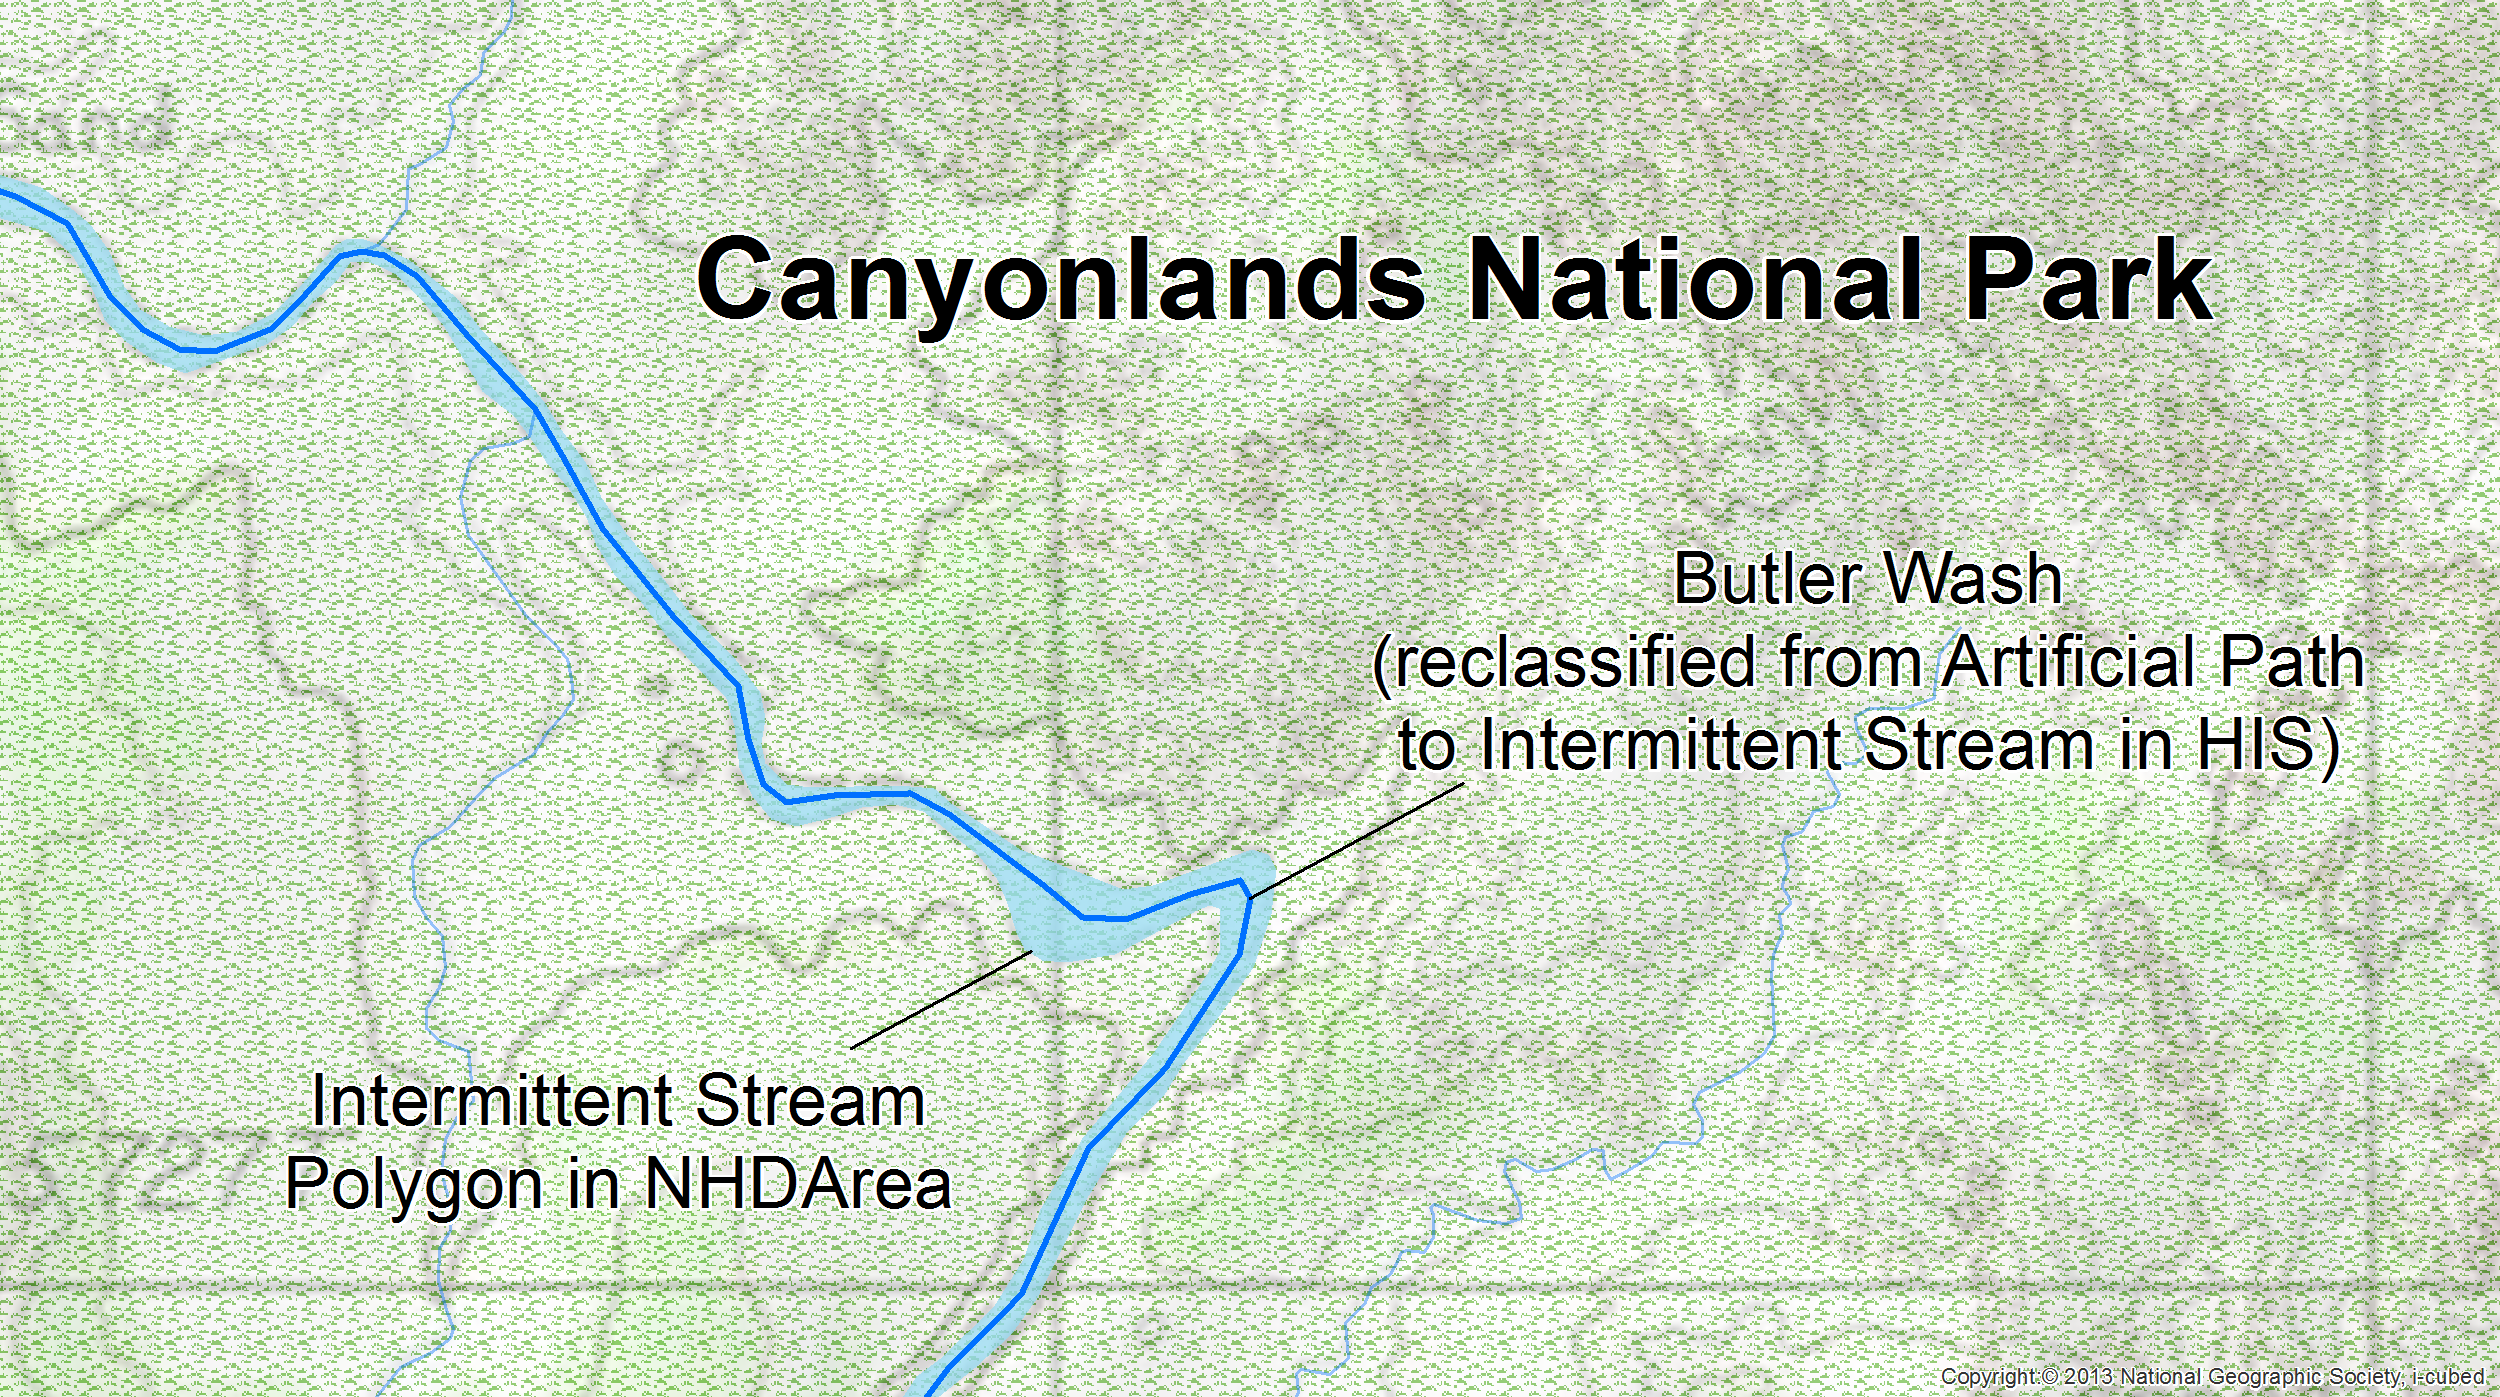 Since Butler Wash in Canyonlands National Park was classified as an intermittent stream polygon in NHDArea, the centerline artificial path was reclassified as an intermittent stream in HIS flowline statistics.